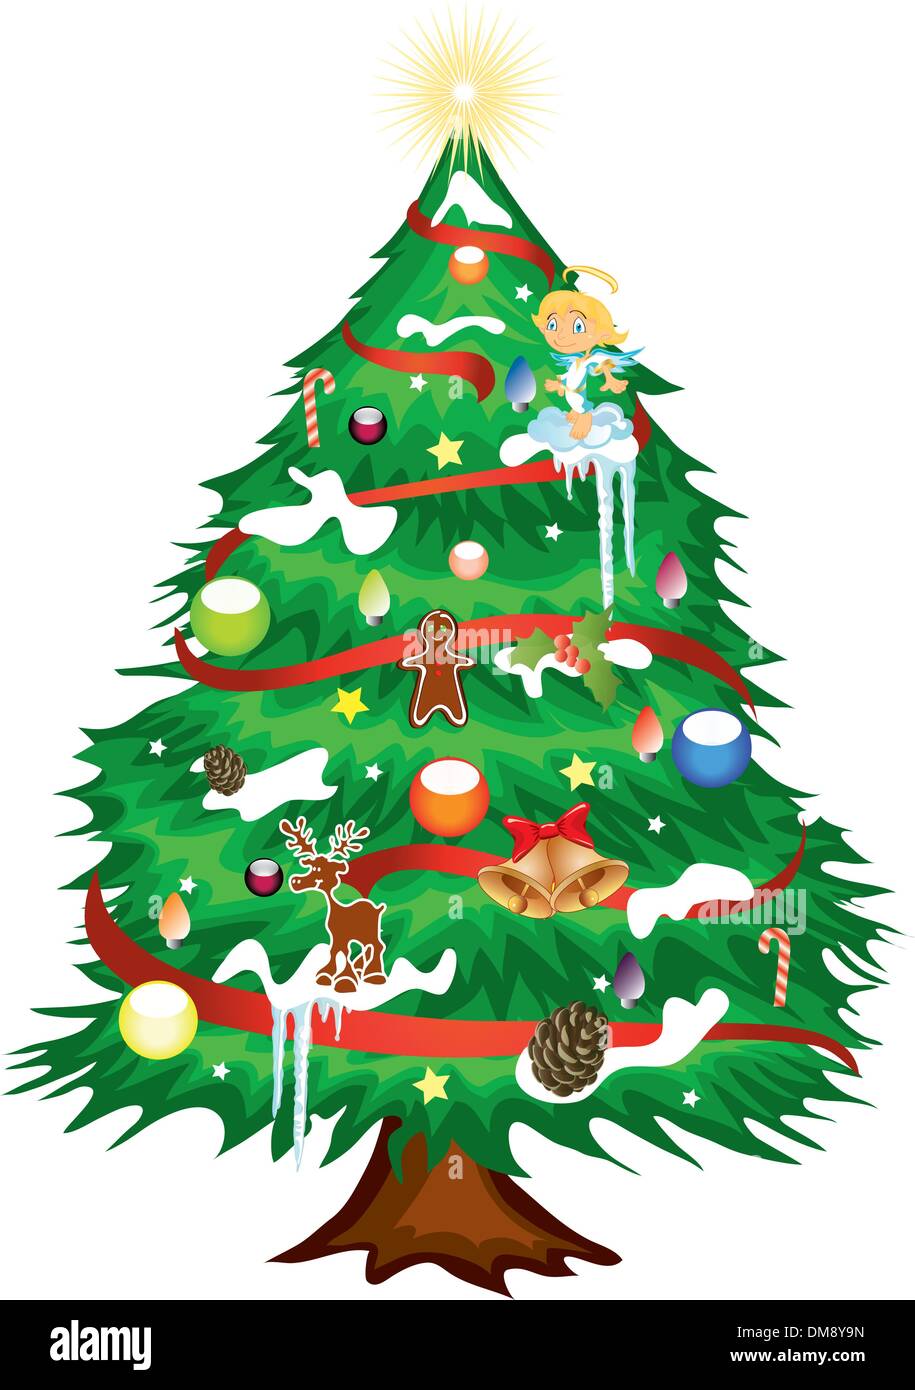 Christmas tree decorated Stock Vector